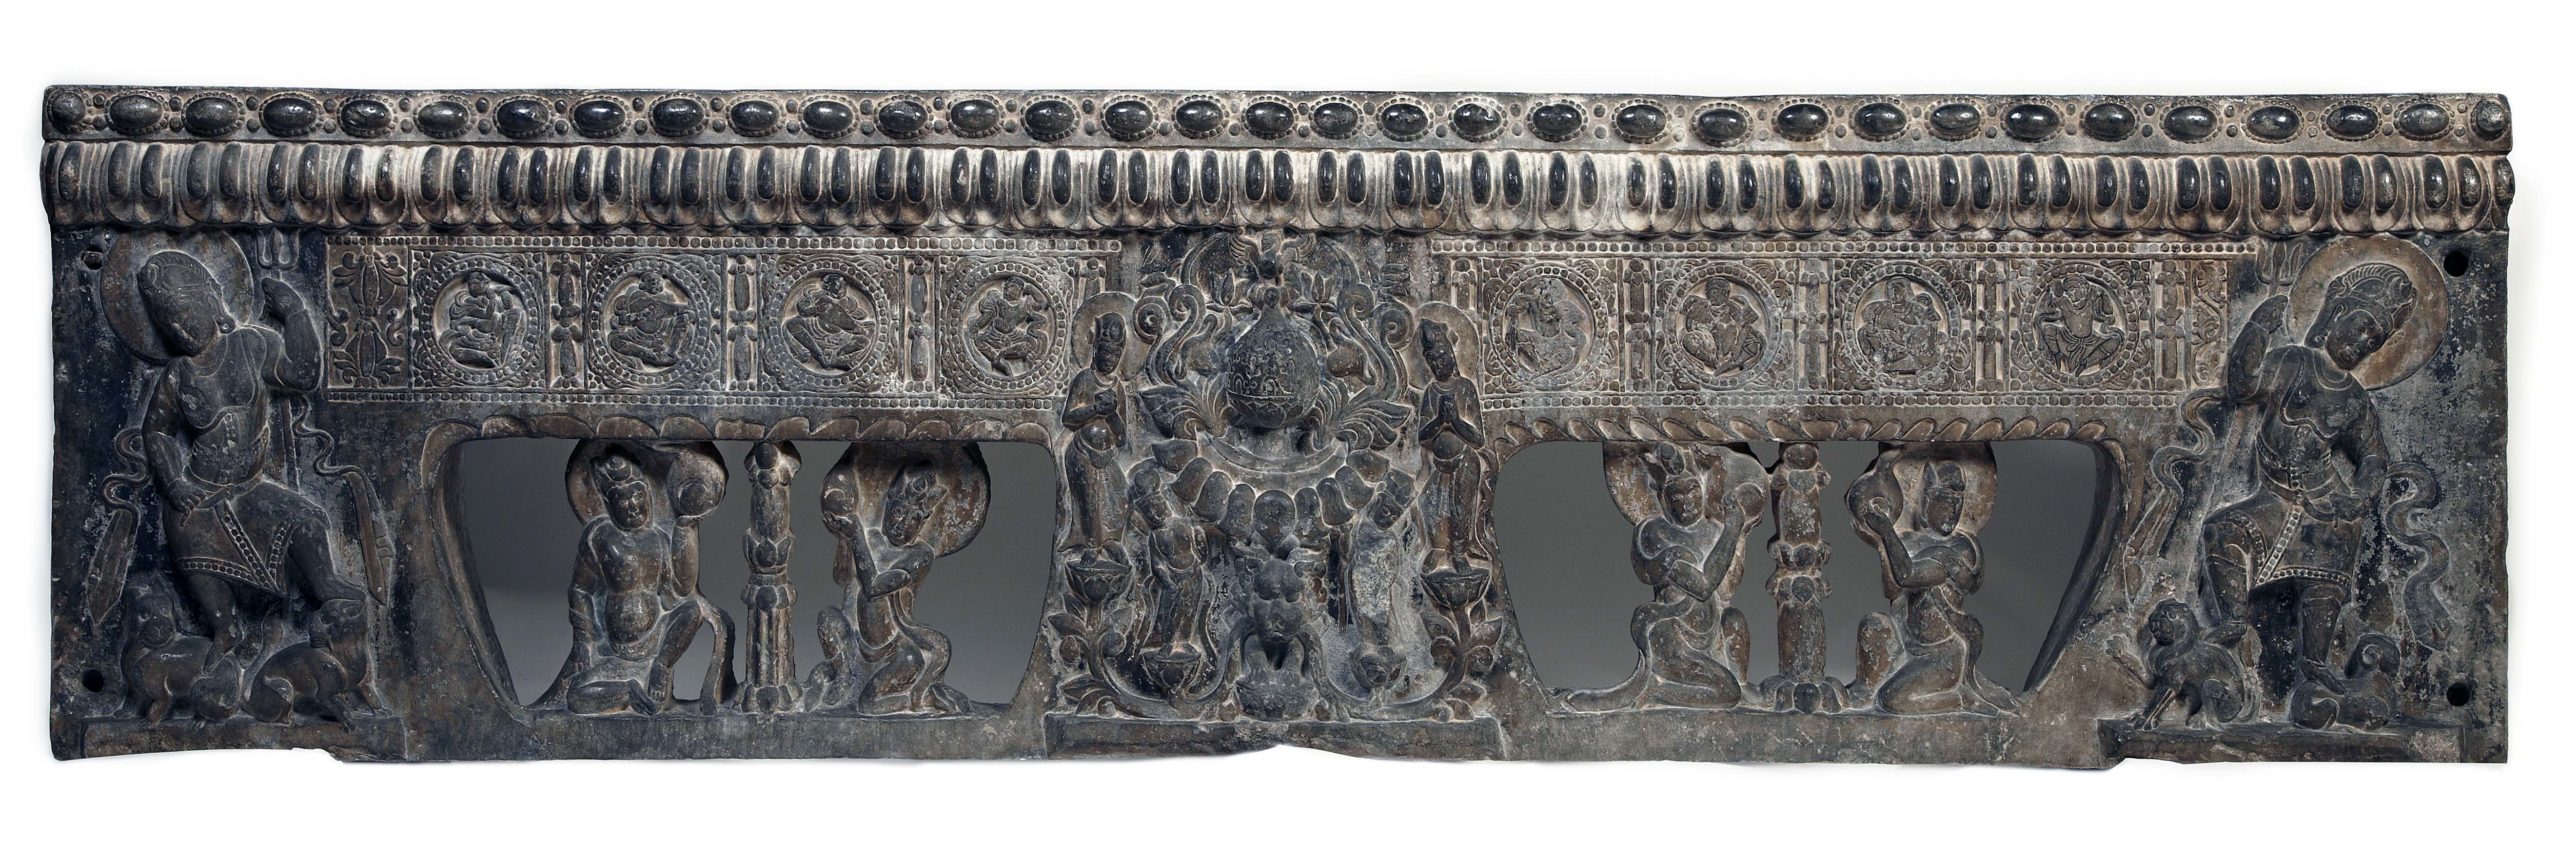 Frontal from the base of a funerary couch with Sogdian musicians and dancers and Buddhist divinities, Northern Qi dynasty, Period of Division, Northern Qi dynasty, 550-577, Grey marble with traces of pigment, China, Henan province, Probably Ce xian, 60.3 high x 234 x 23.5 cm (Freer Gallery of Art, Smithsonian, Washington, DC: Gift of Charles Lang Freer, F1915.110)